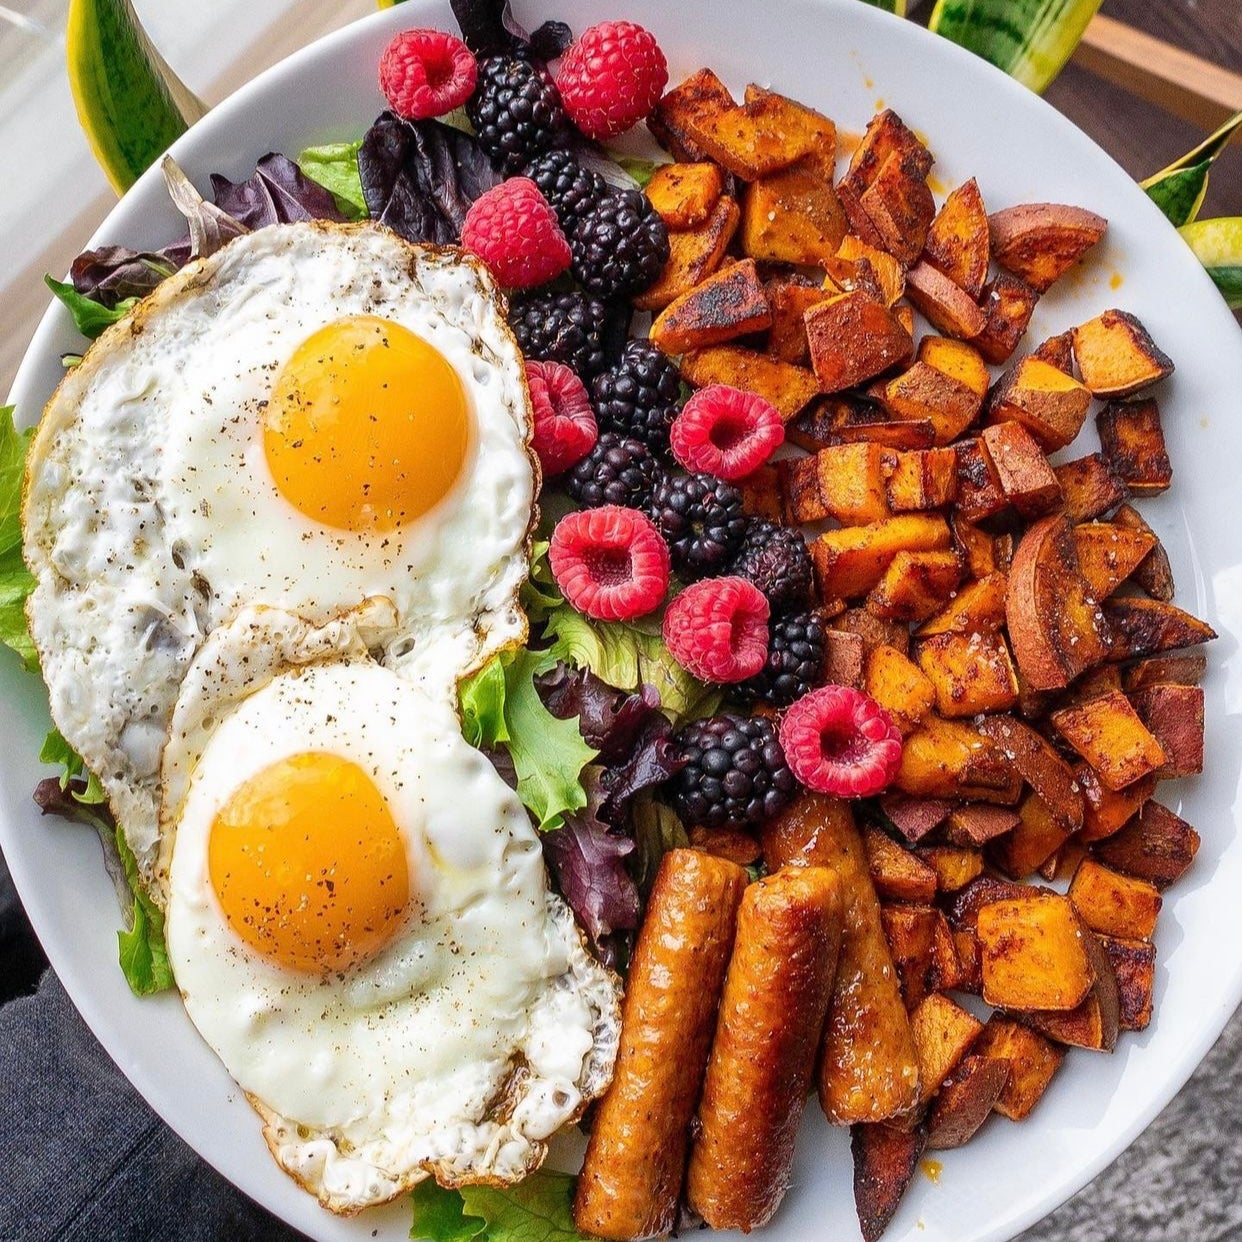 Protein packed lunch served with diced sauteed sweet potatos, small salad topped with two sunny-side-up eggs, mix of raspberries and blackberries, finished with three fully cooked mild breakfast sausage links.